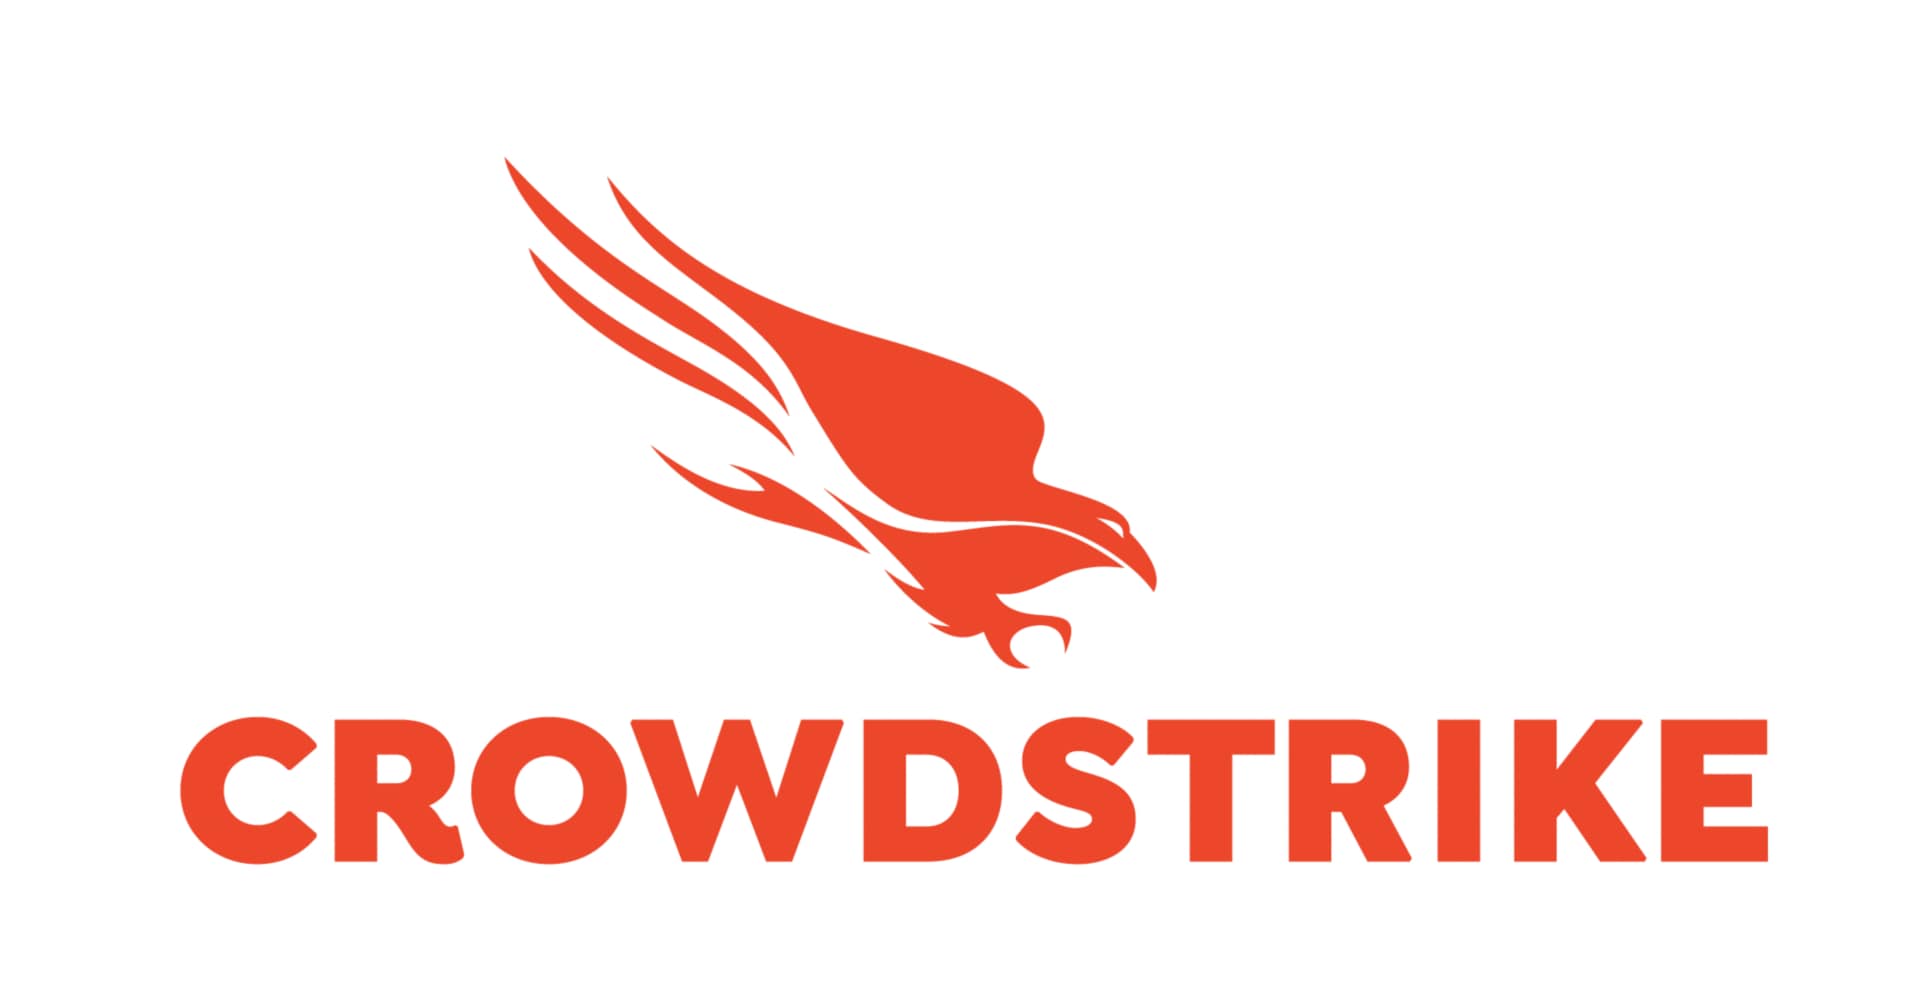 CrowdStrike 8-Month Falcon for Mobile Standard Software Subscription